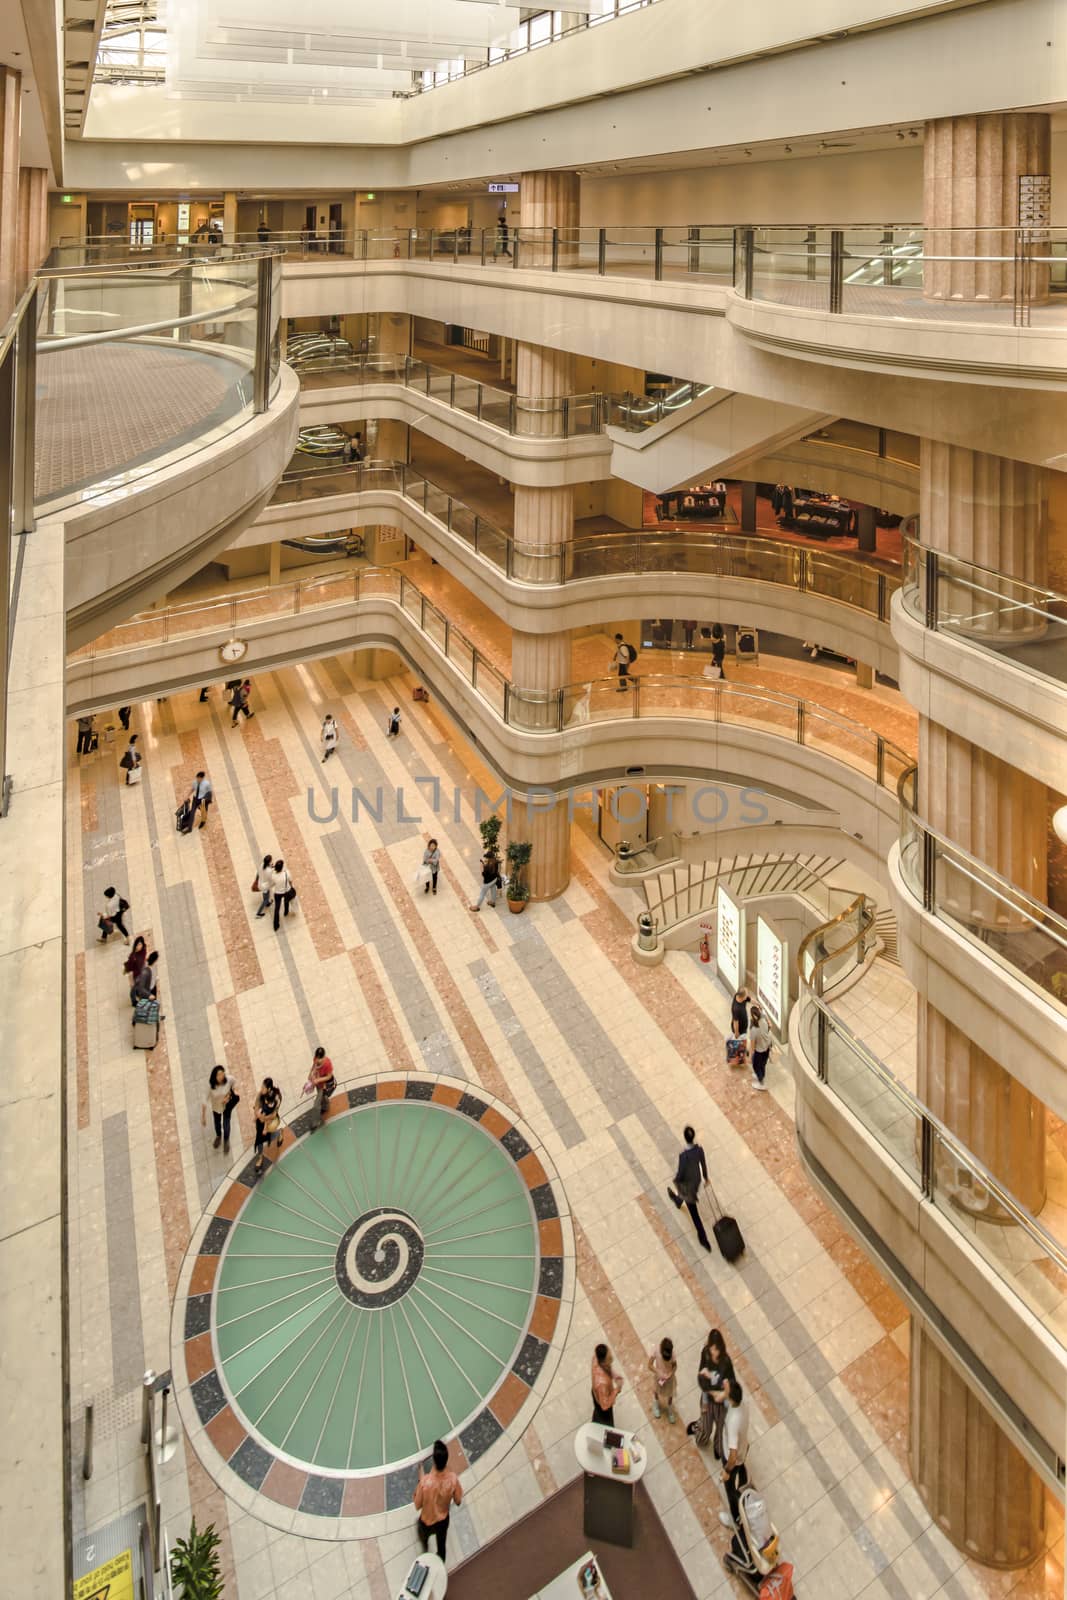 Interior wide view of the Haneda Airport Market Place with a turbine design decoration on floor and atirum on top.